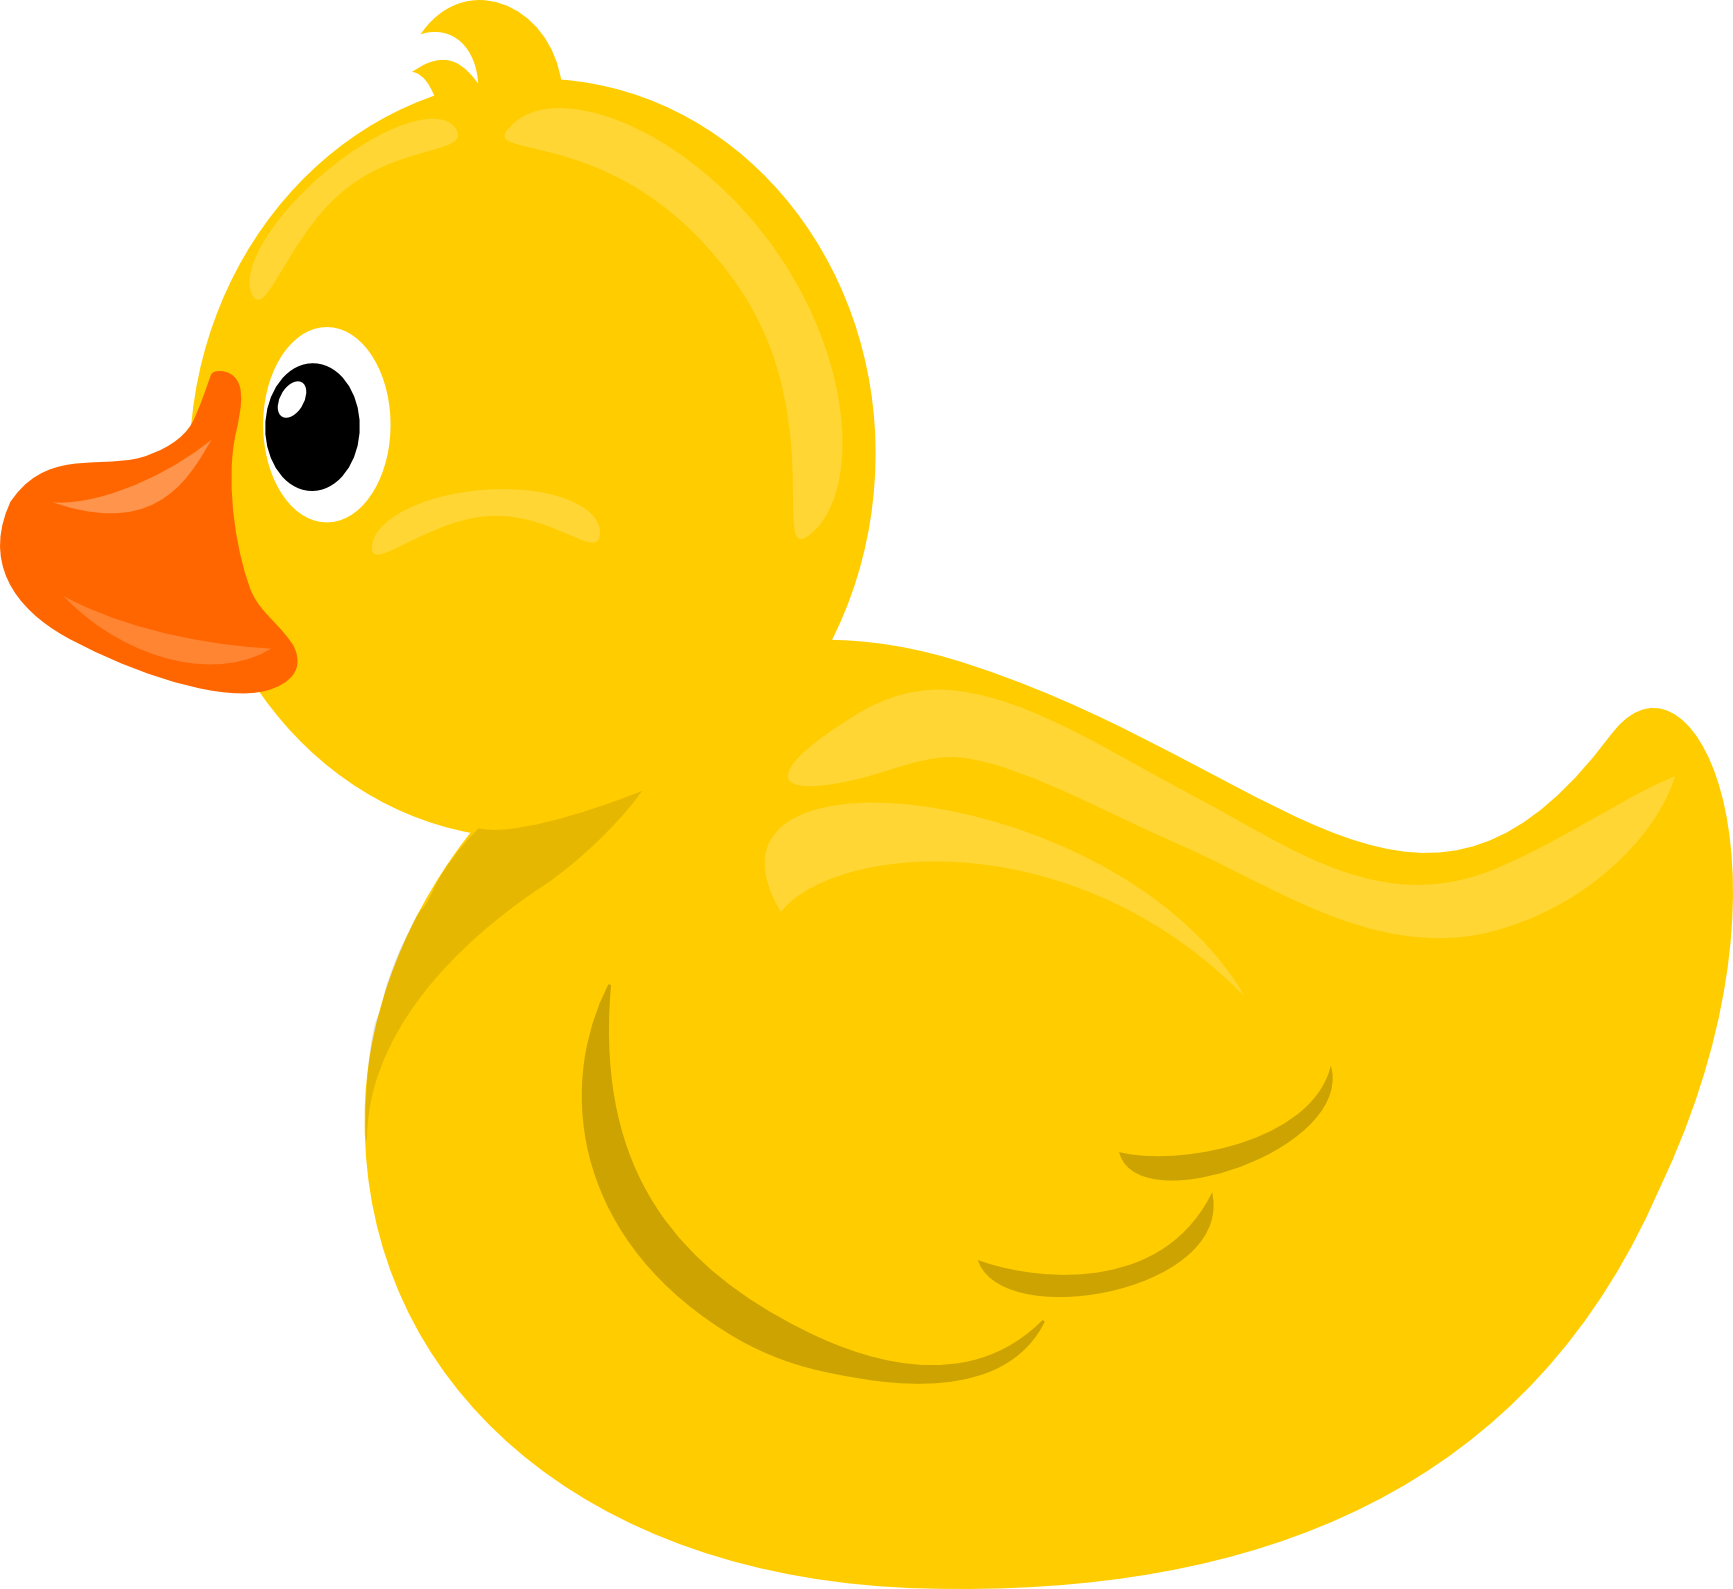 Angry rubber duck clipart